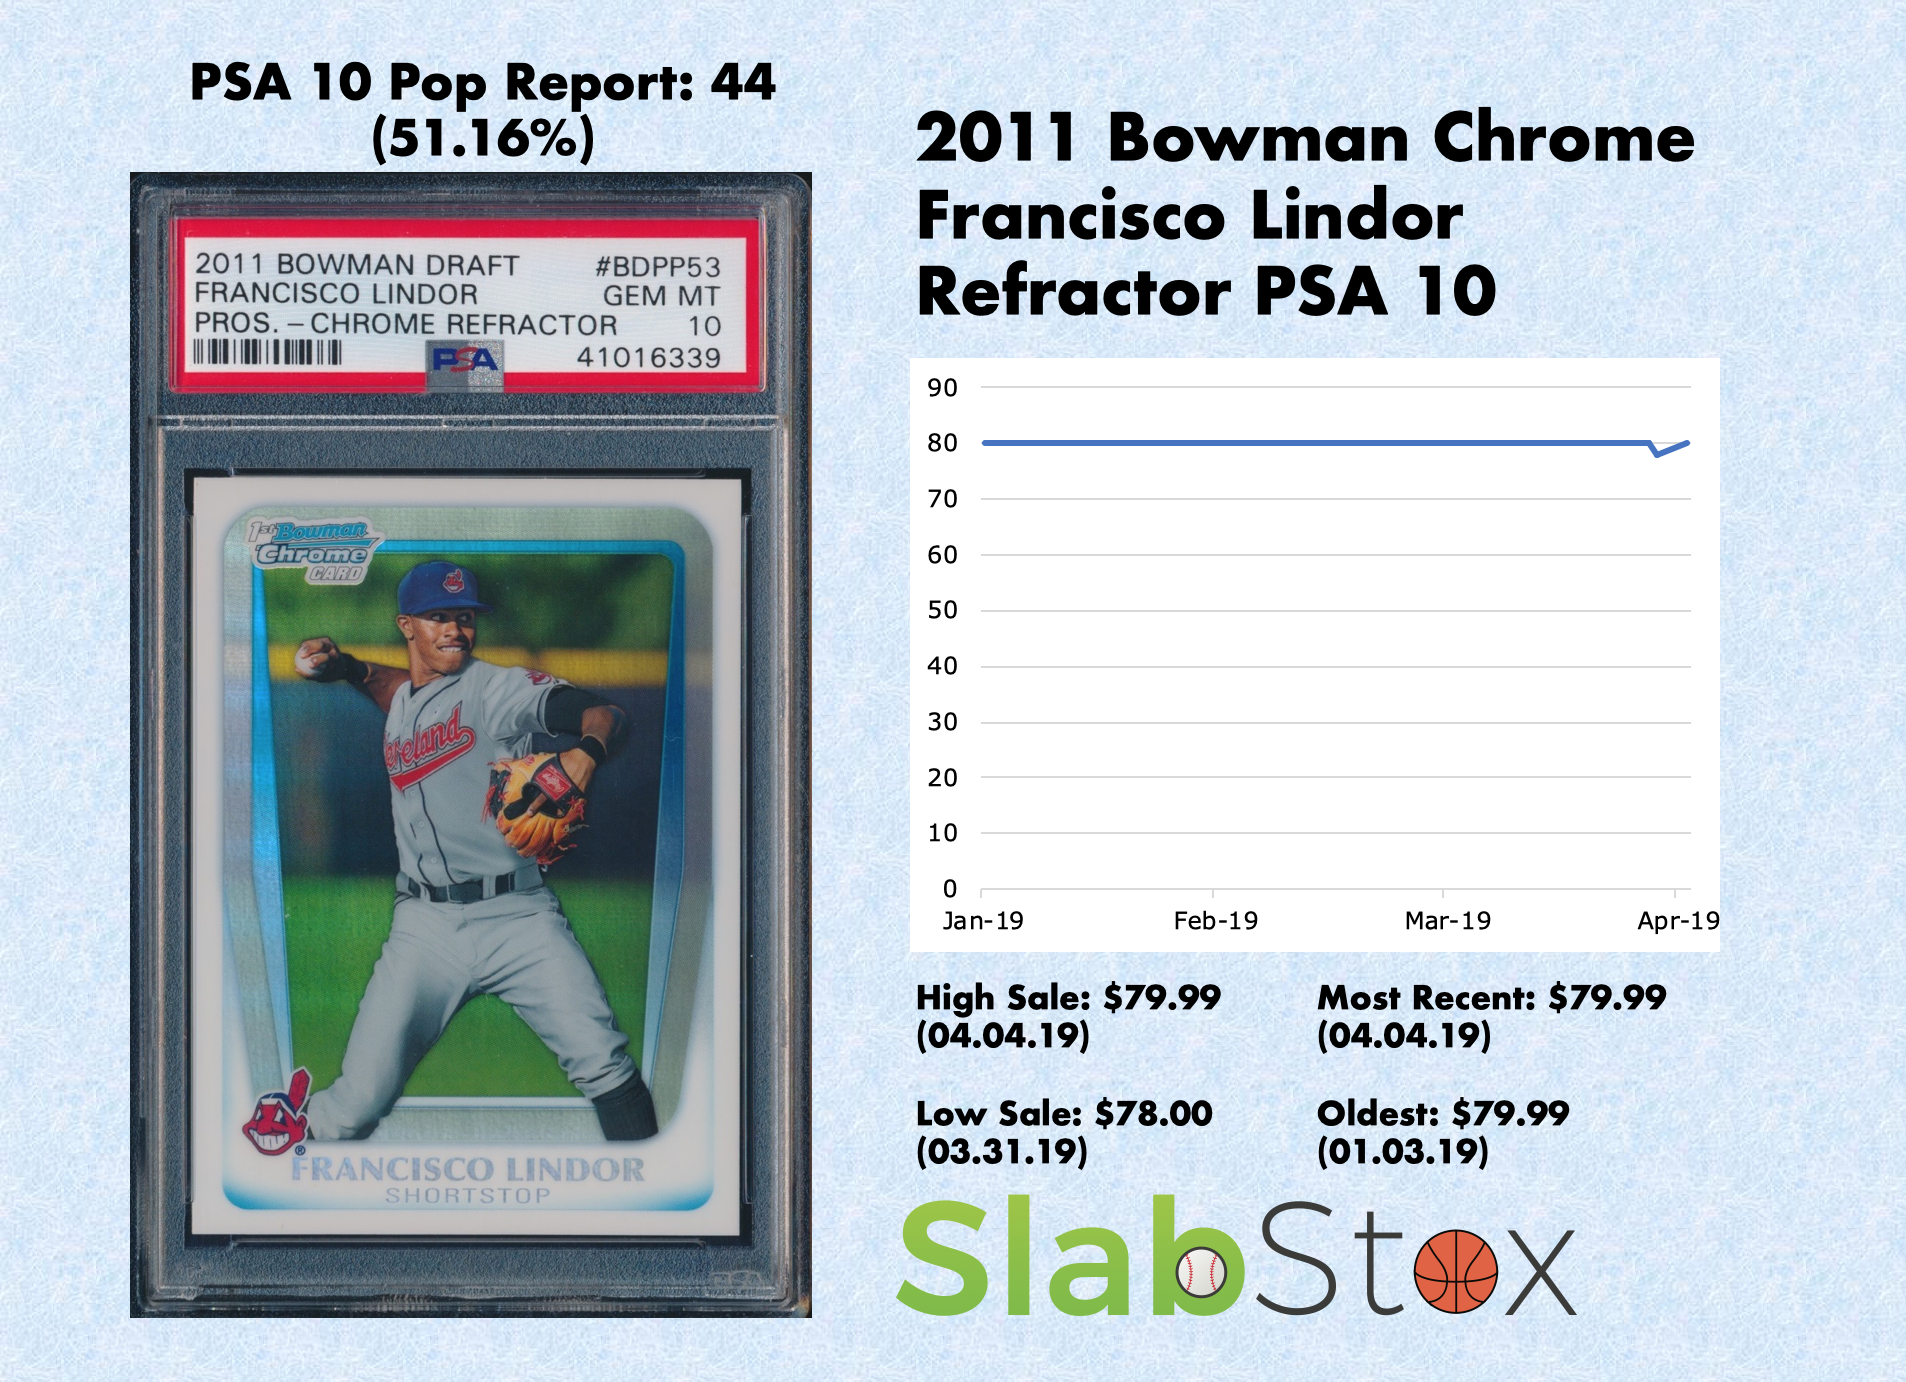 SlabStox infographic for 2011 Bowman Chrome Francisco Lindor Refractor PSA 10 sports trading card